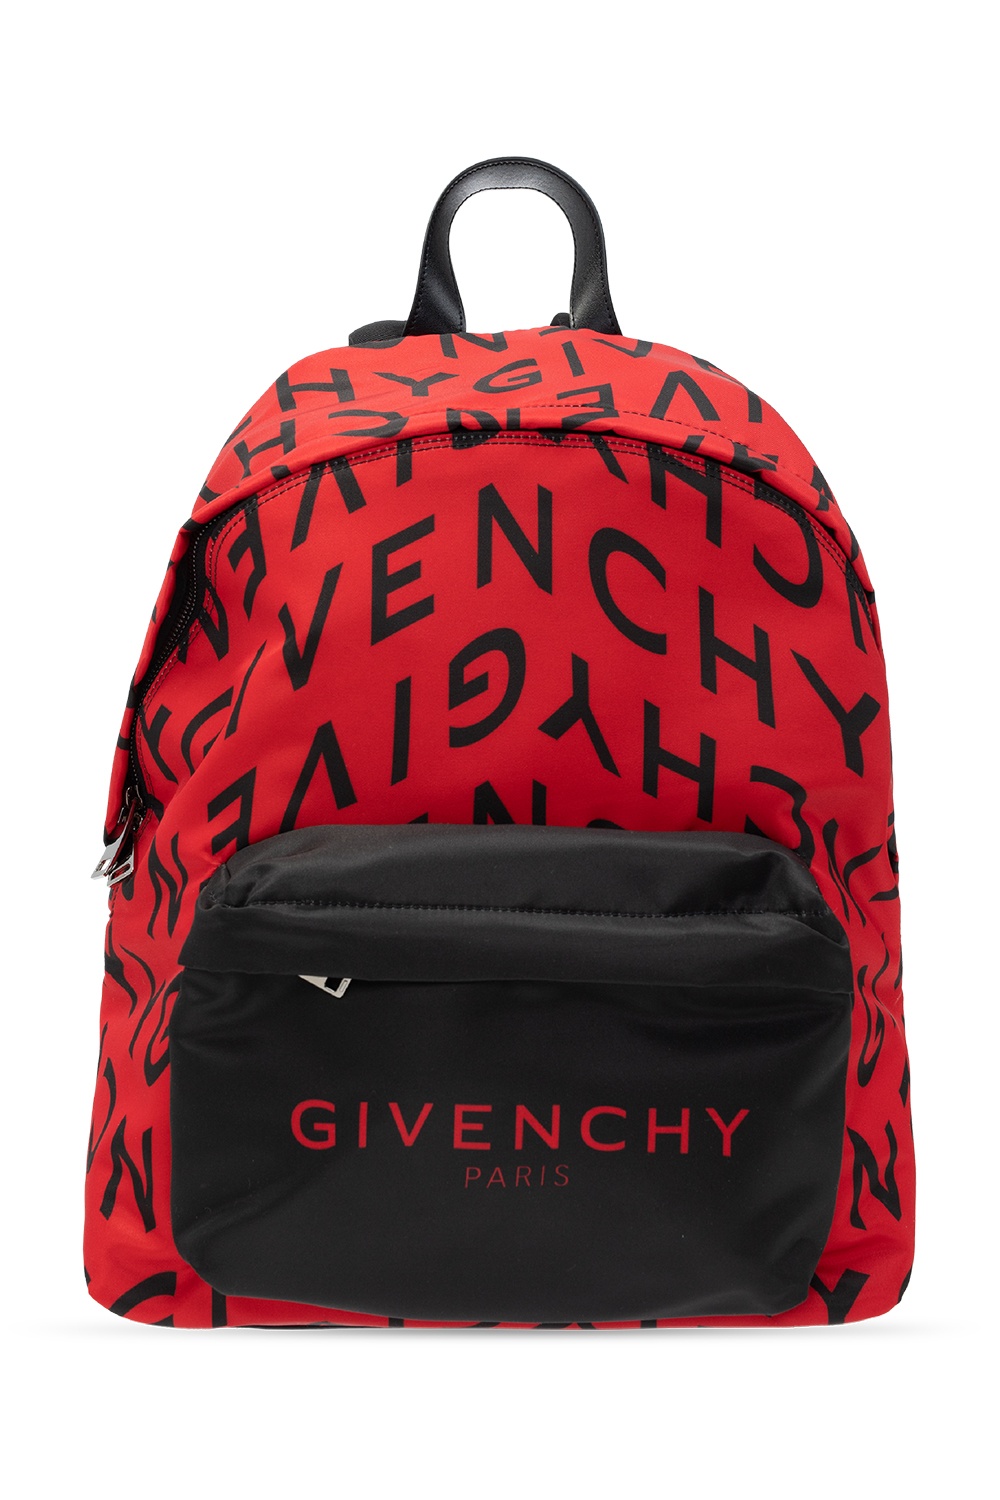 Givenchy ‘Urban’ backpack with logo